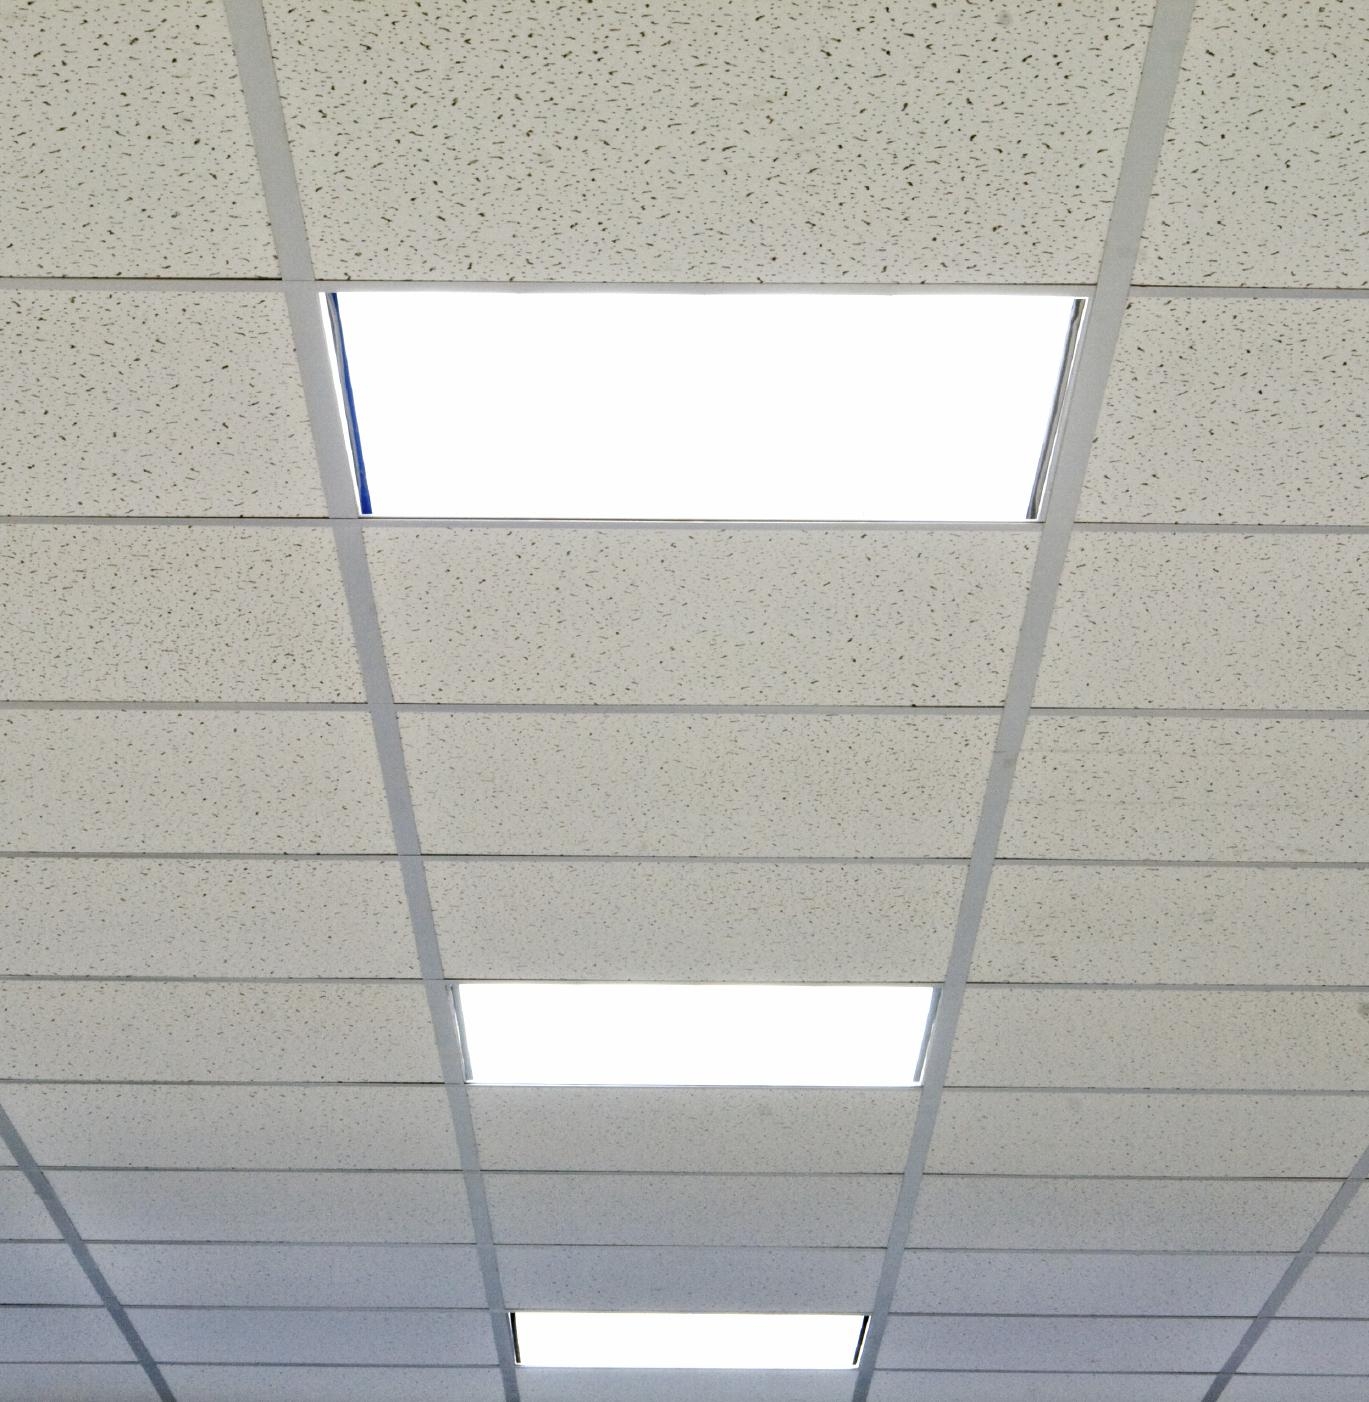 Ceiling Tiles For Office Space Ceiling Tiles For Office Space pros and cons of office place dro compass office solutions 1369 X 1402